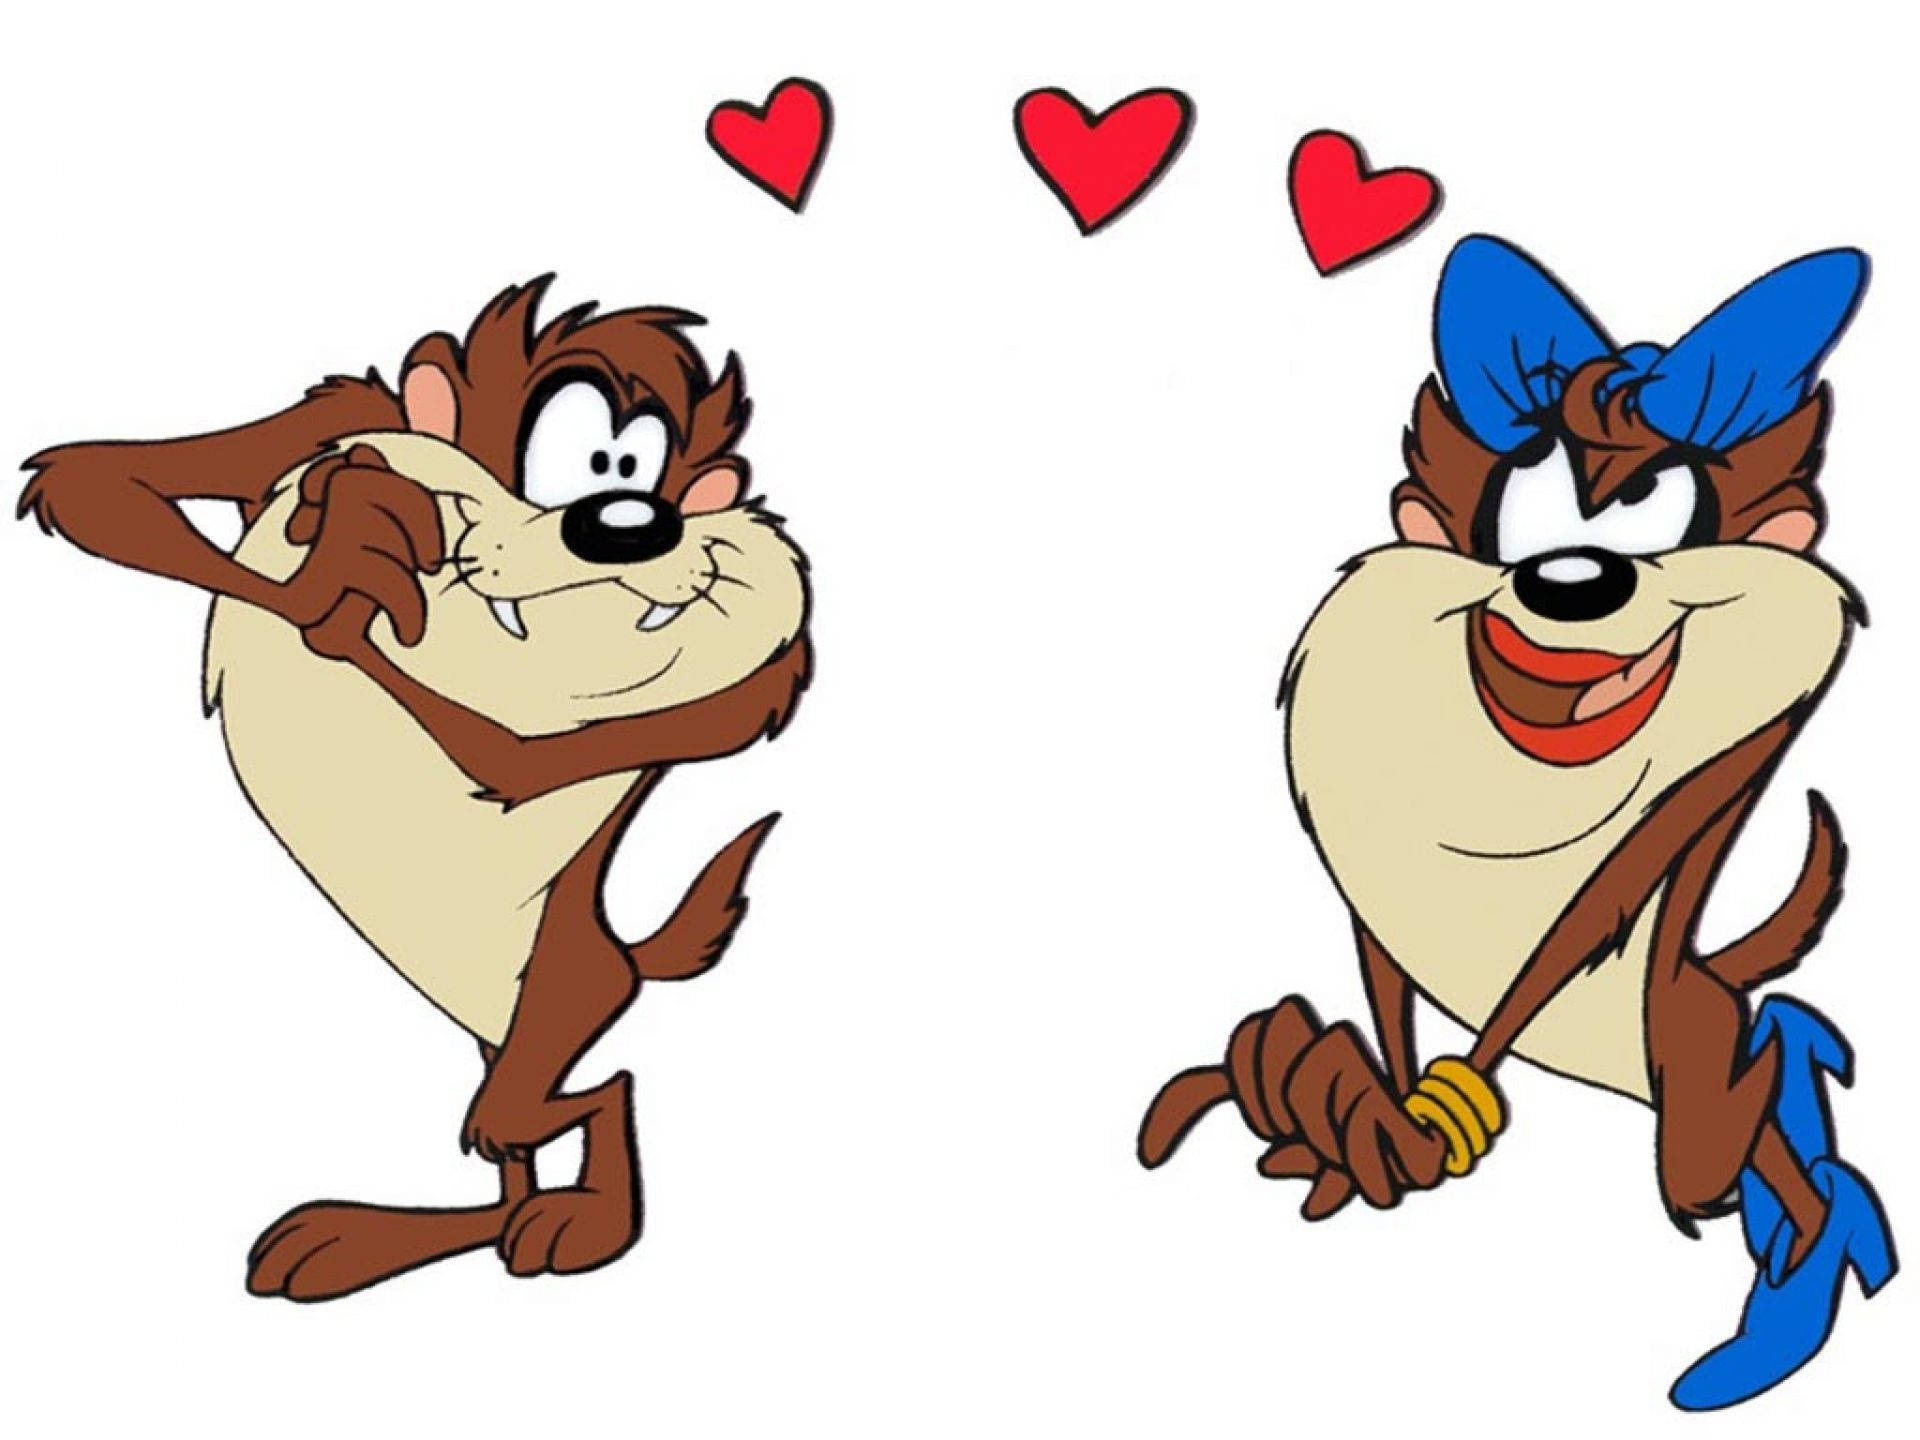 Two Cartoon Characters With Hearts On Their Faces Background